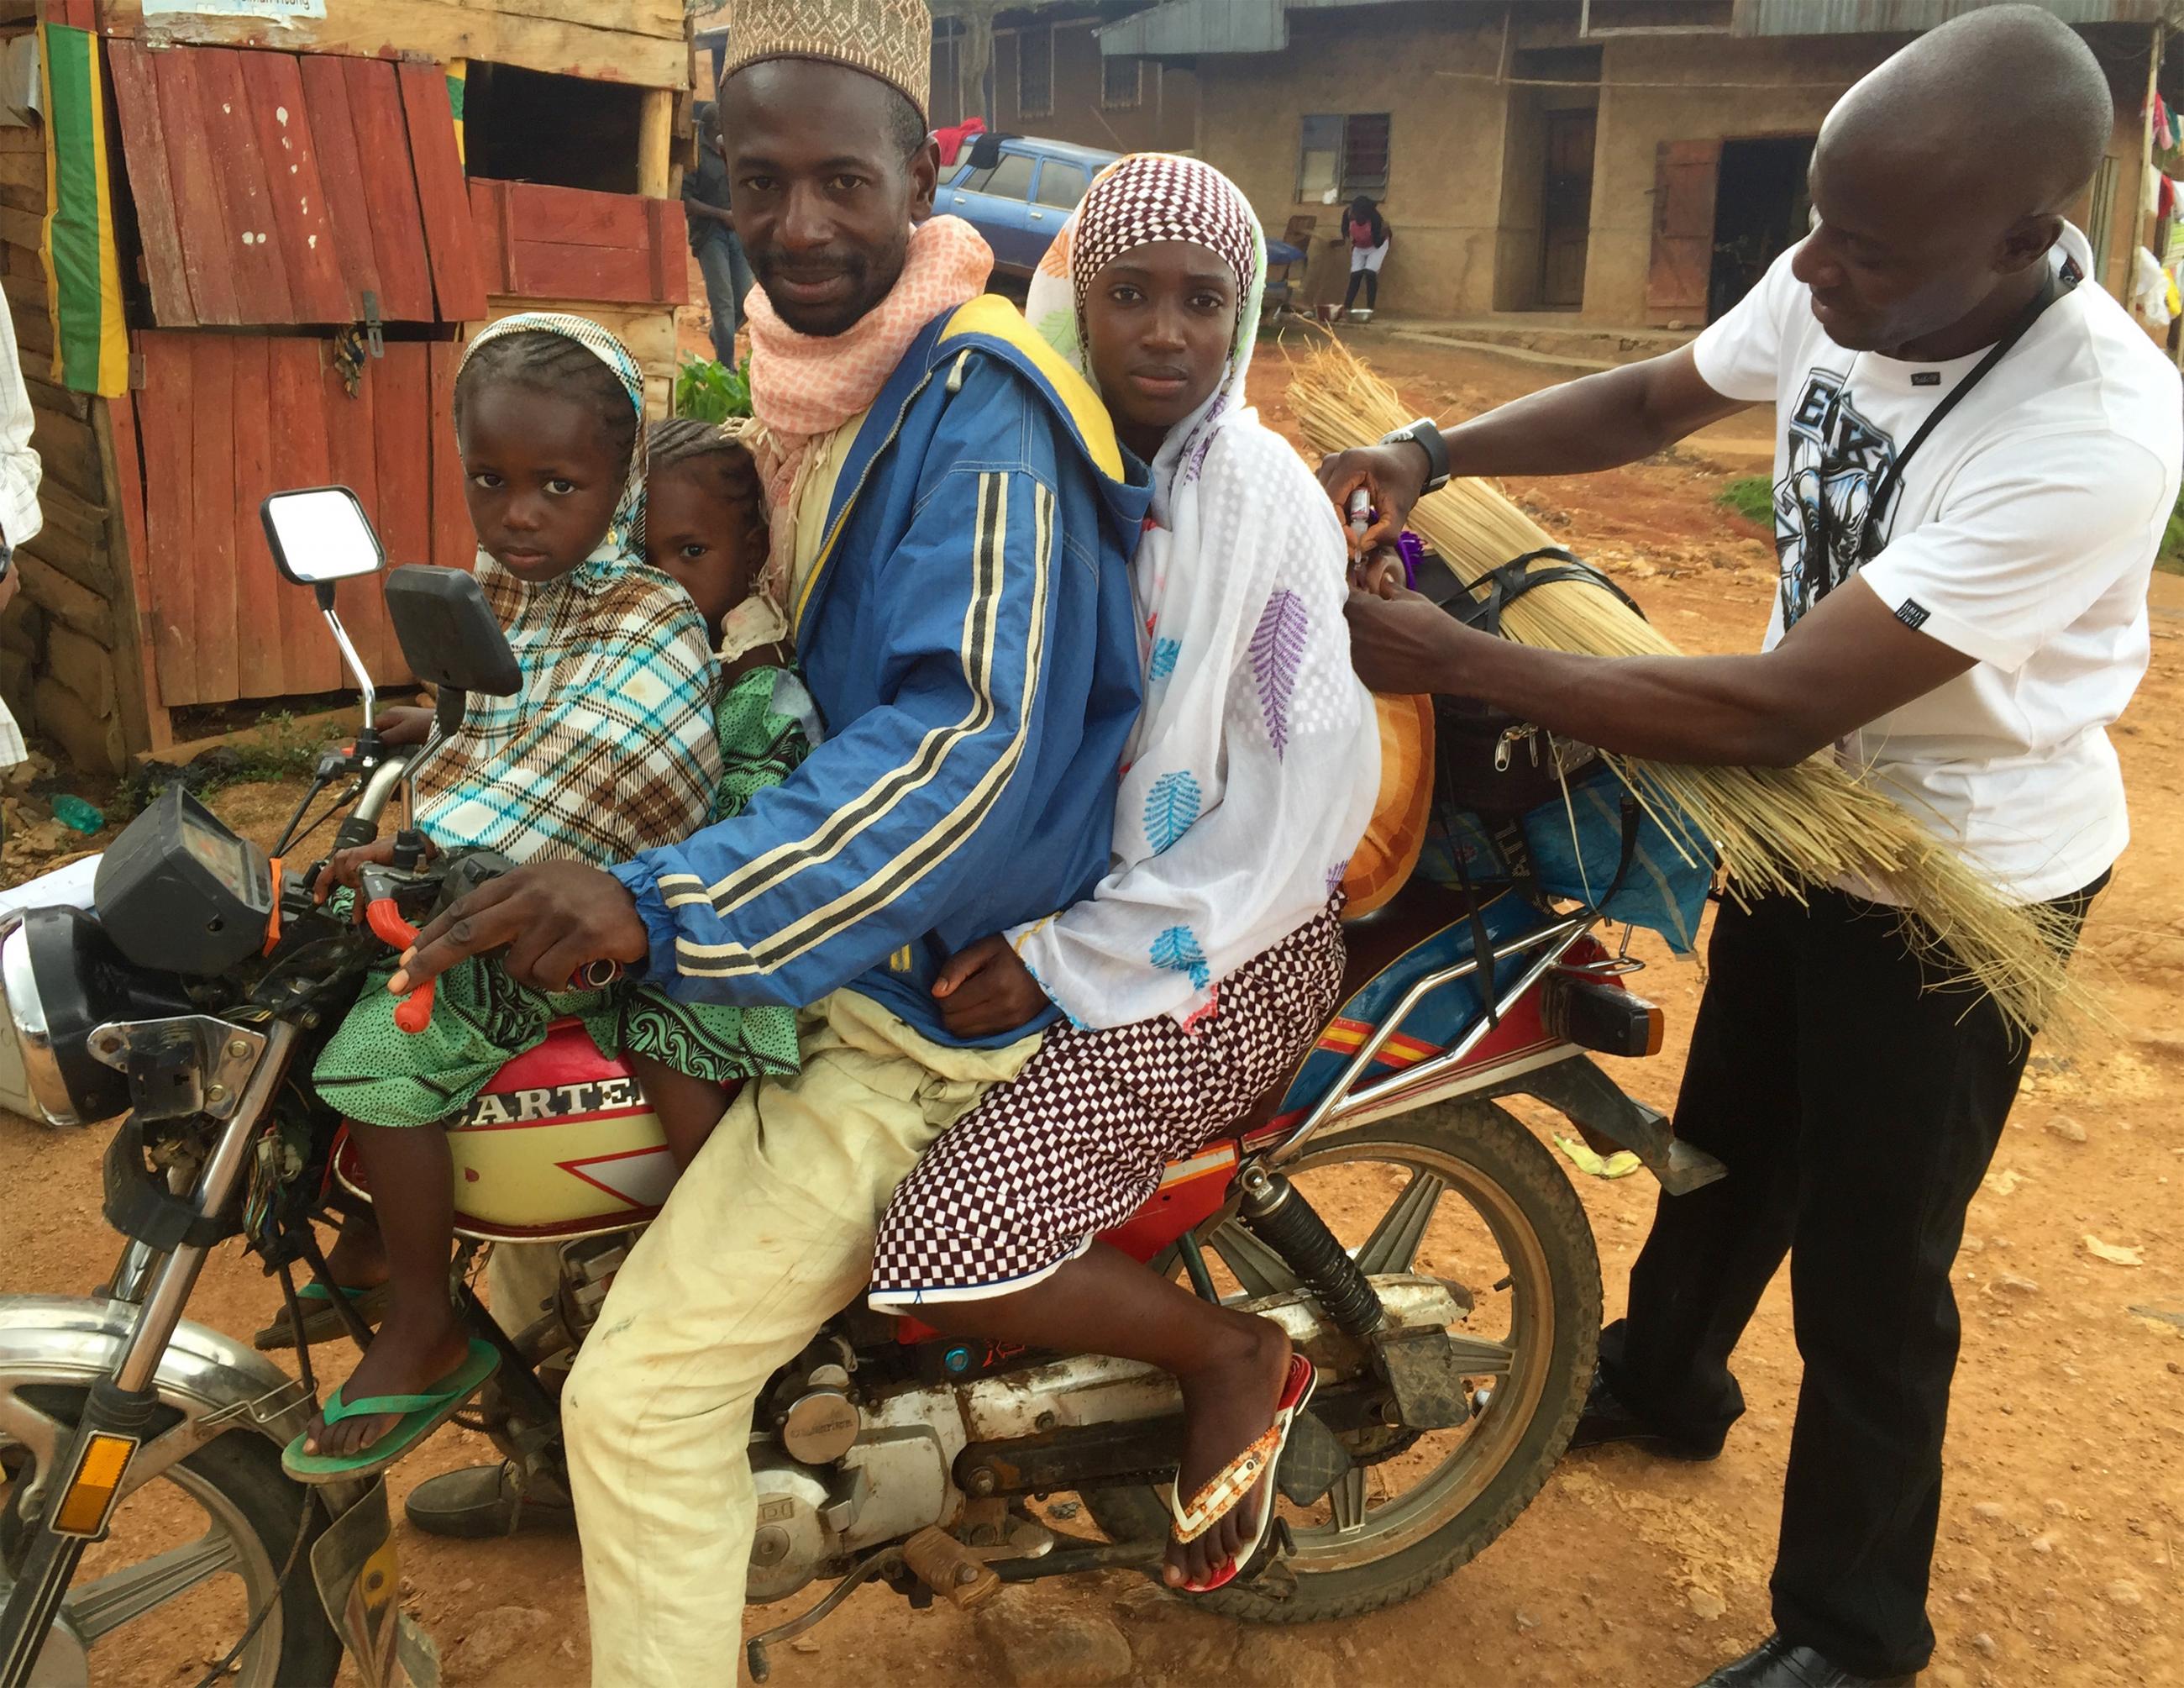 This picture shows a health care worker giving drops of polio vaccine to a child on the back of a motorcycle crowded with both parents and two other small children.